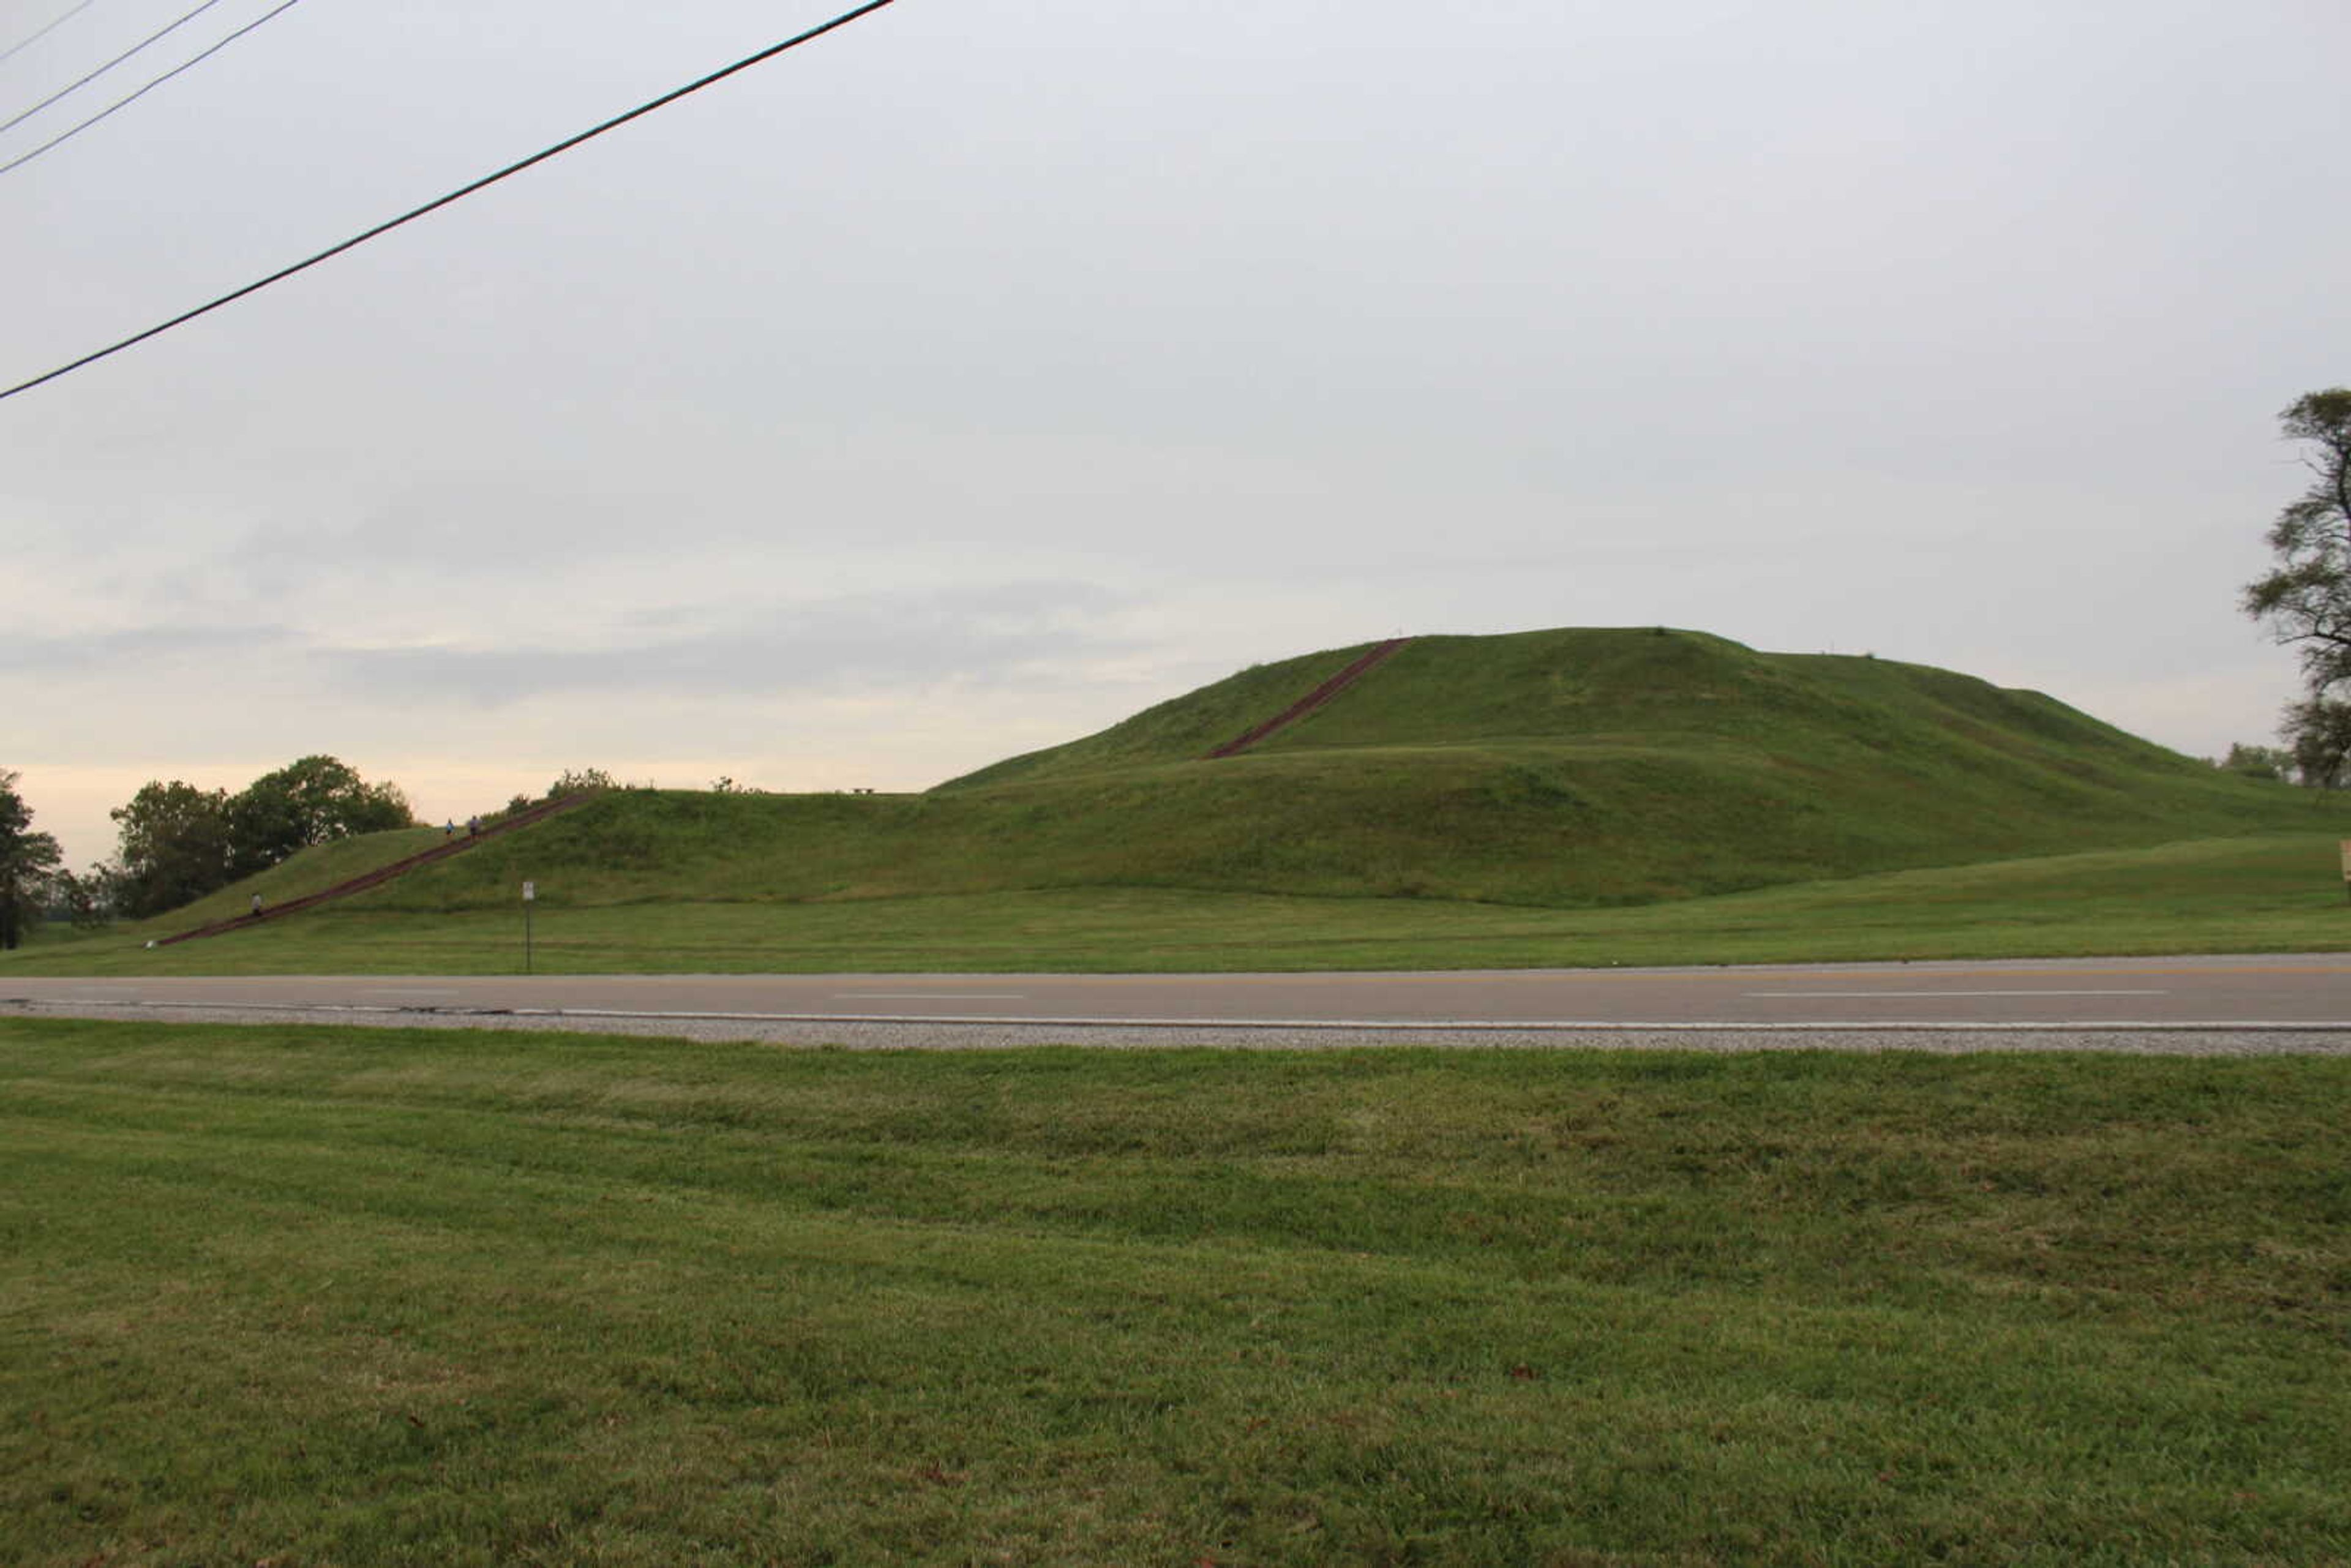 Monk's Mound is the largest Pre-Columbian earthwork in the Americas. Monk's Mound is located in Cahokia, which was the largest Pre-Columbian city north of Mexico.